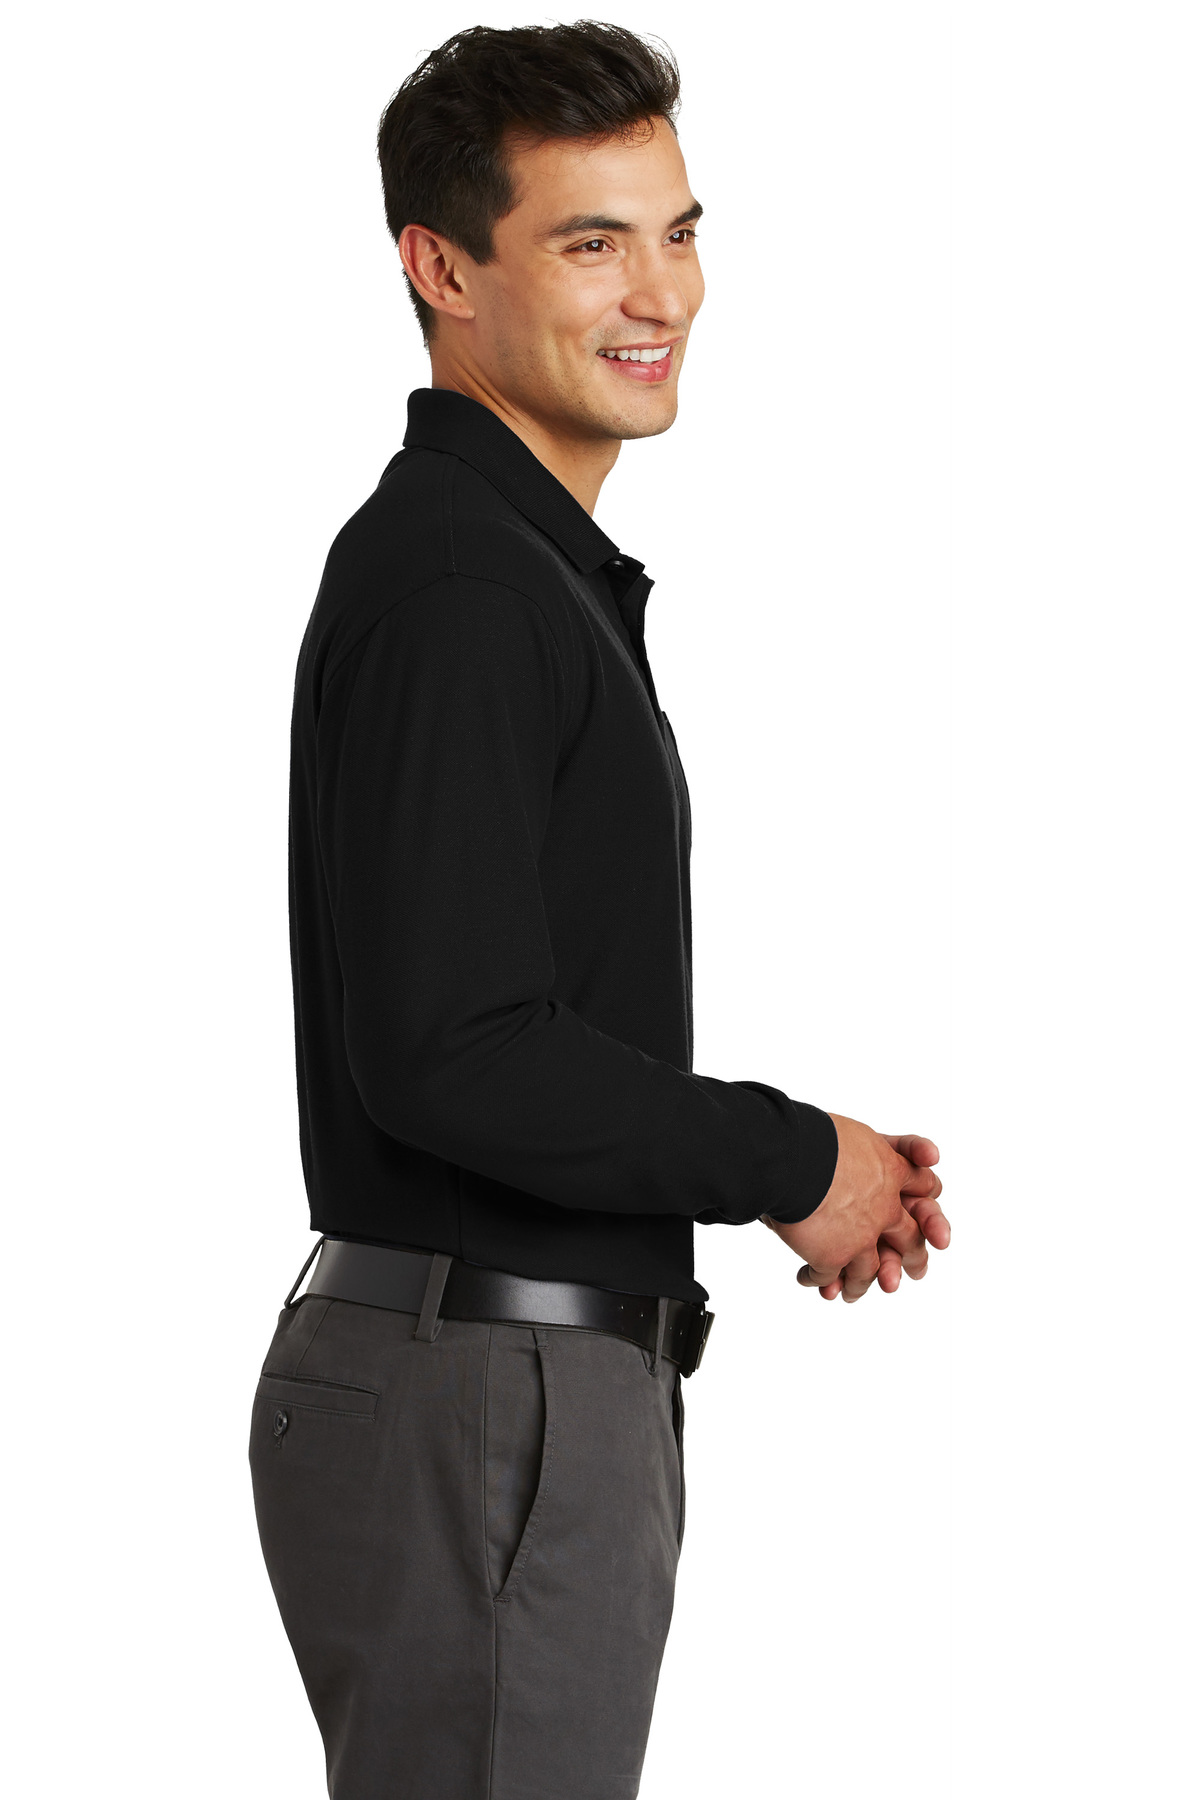 K500P Port Authority Silk Touch Polo with Pocket